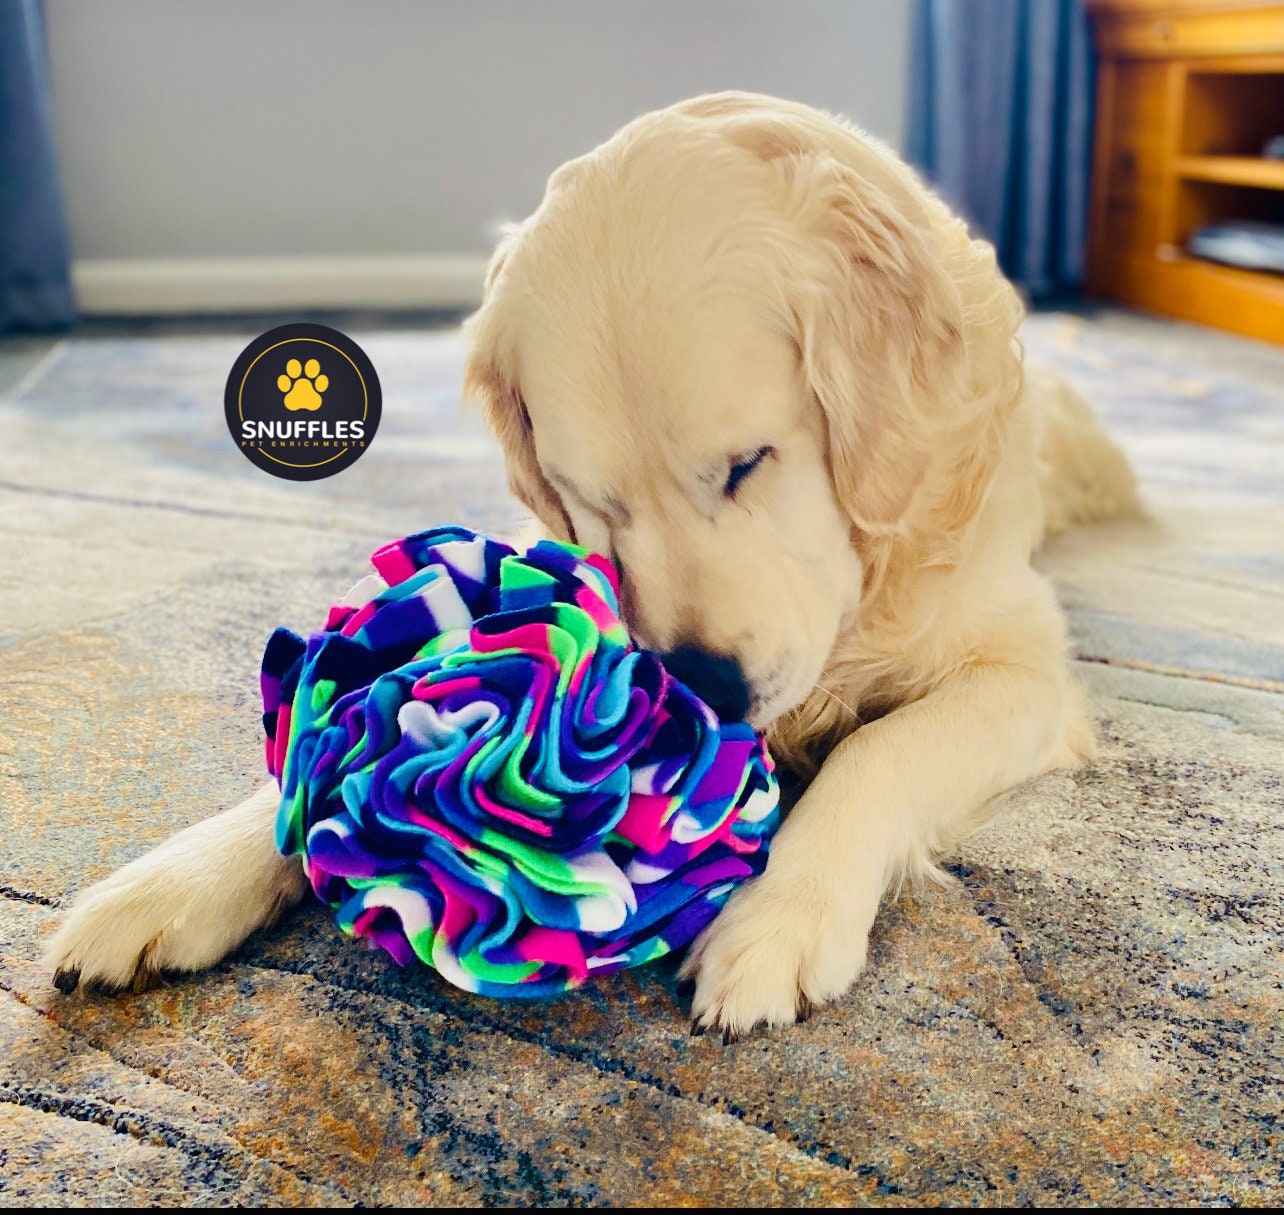 Large Snuffle Ball Fun Enrichment Dog Puzzle Learning & Scent Work Training  Slow Feeder for Medium and Large Dog Breeds dog Gifts 